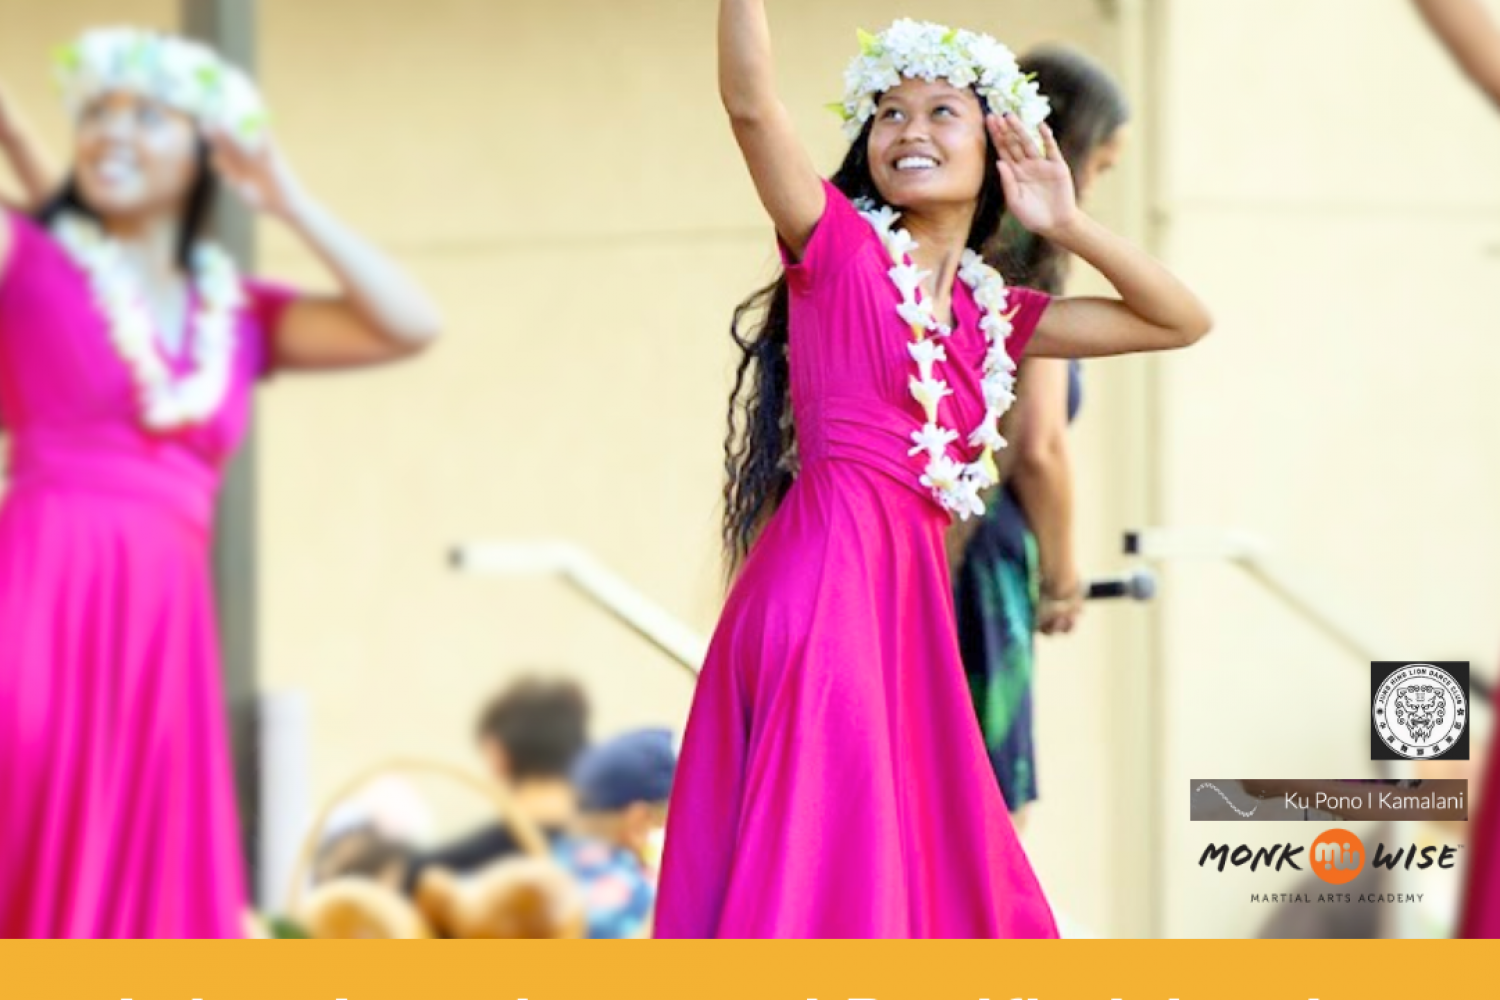 Asian American and Pacific Islander Heritage Month Celebration